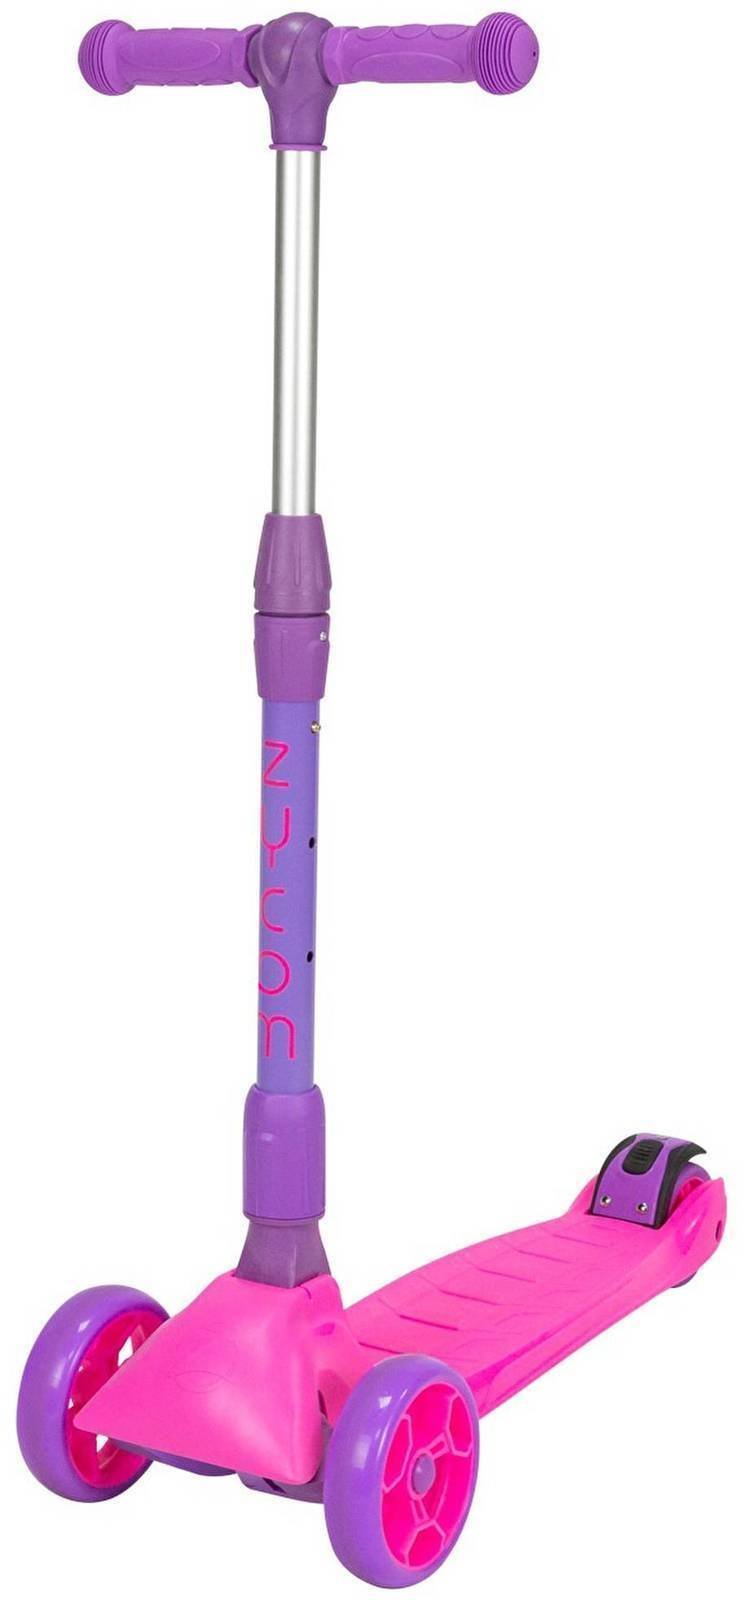 Scooters enfant / Tricycle Zycom Scooter Zinger Pink/Purple Scooters enfant / Tricycle